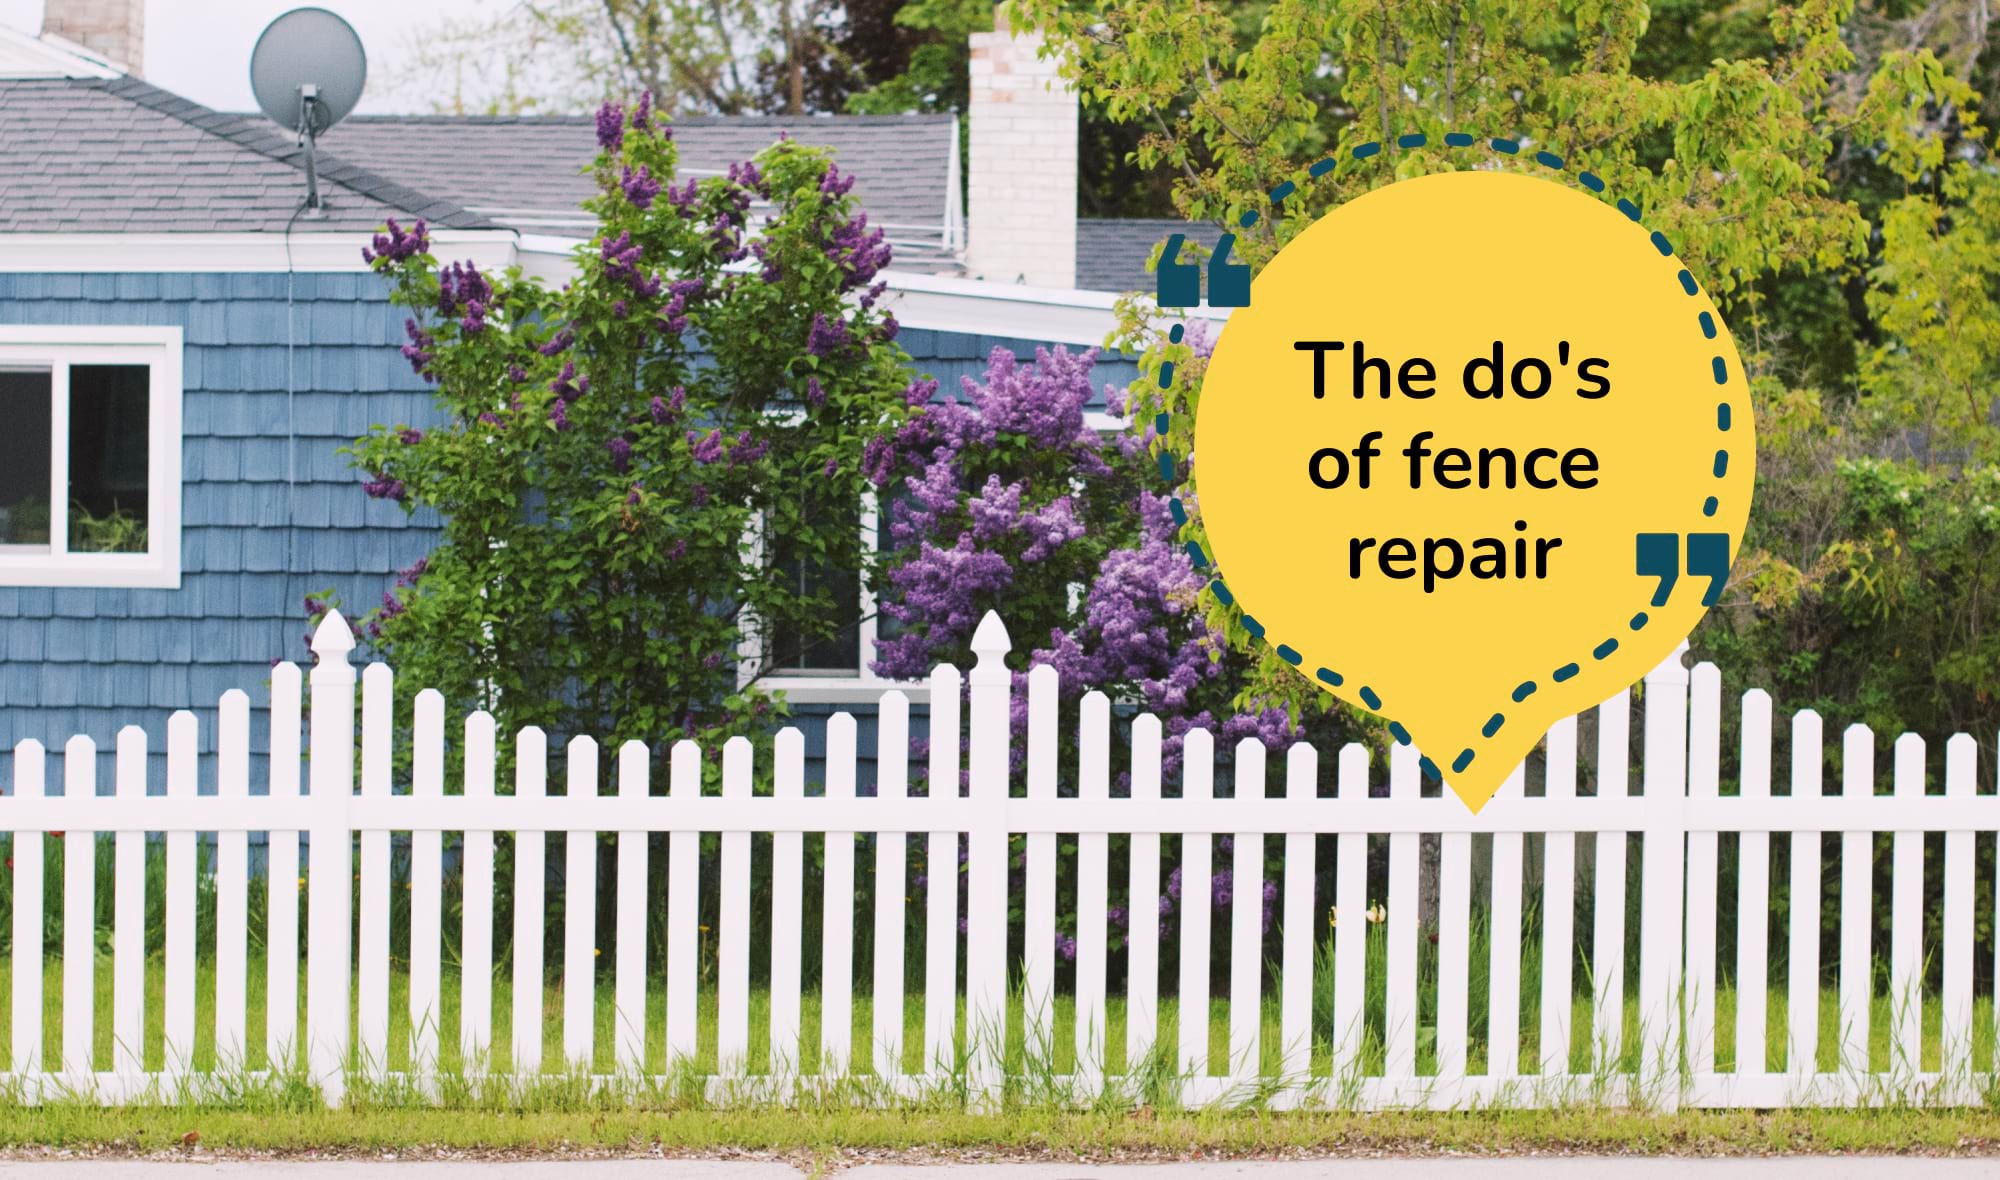 The do's of fence repair